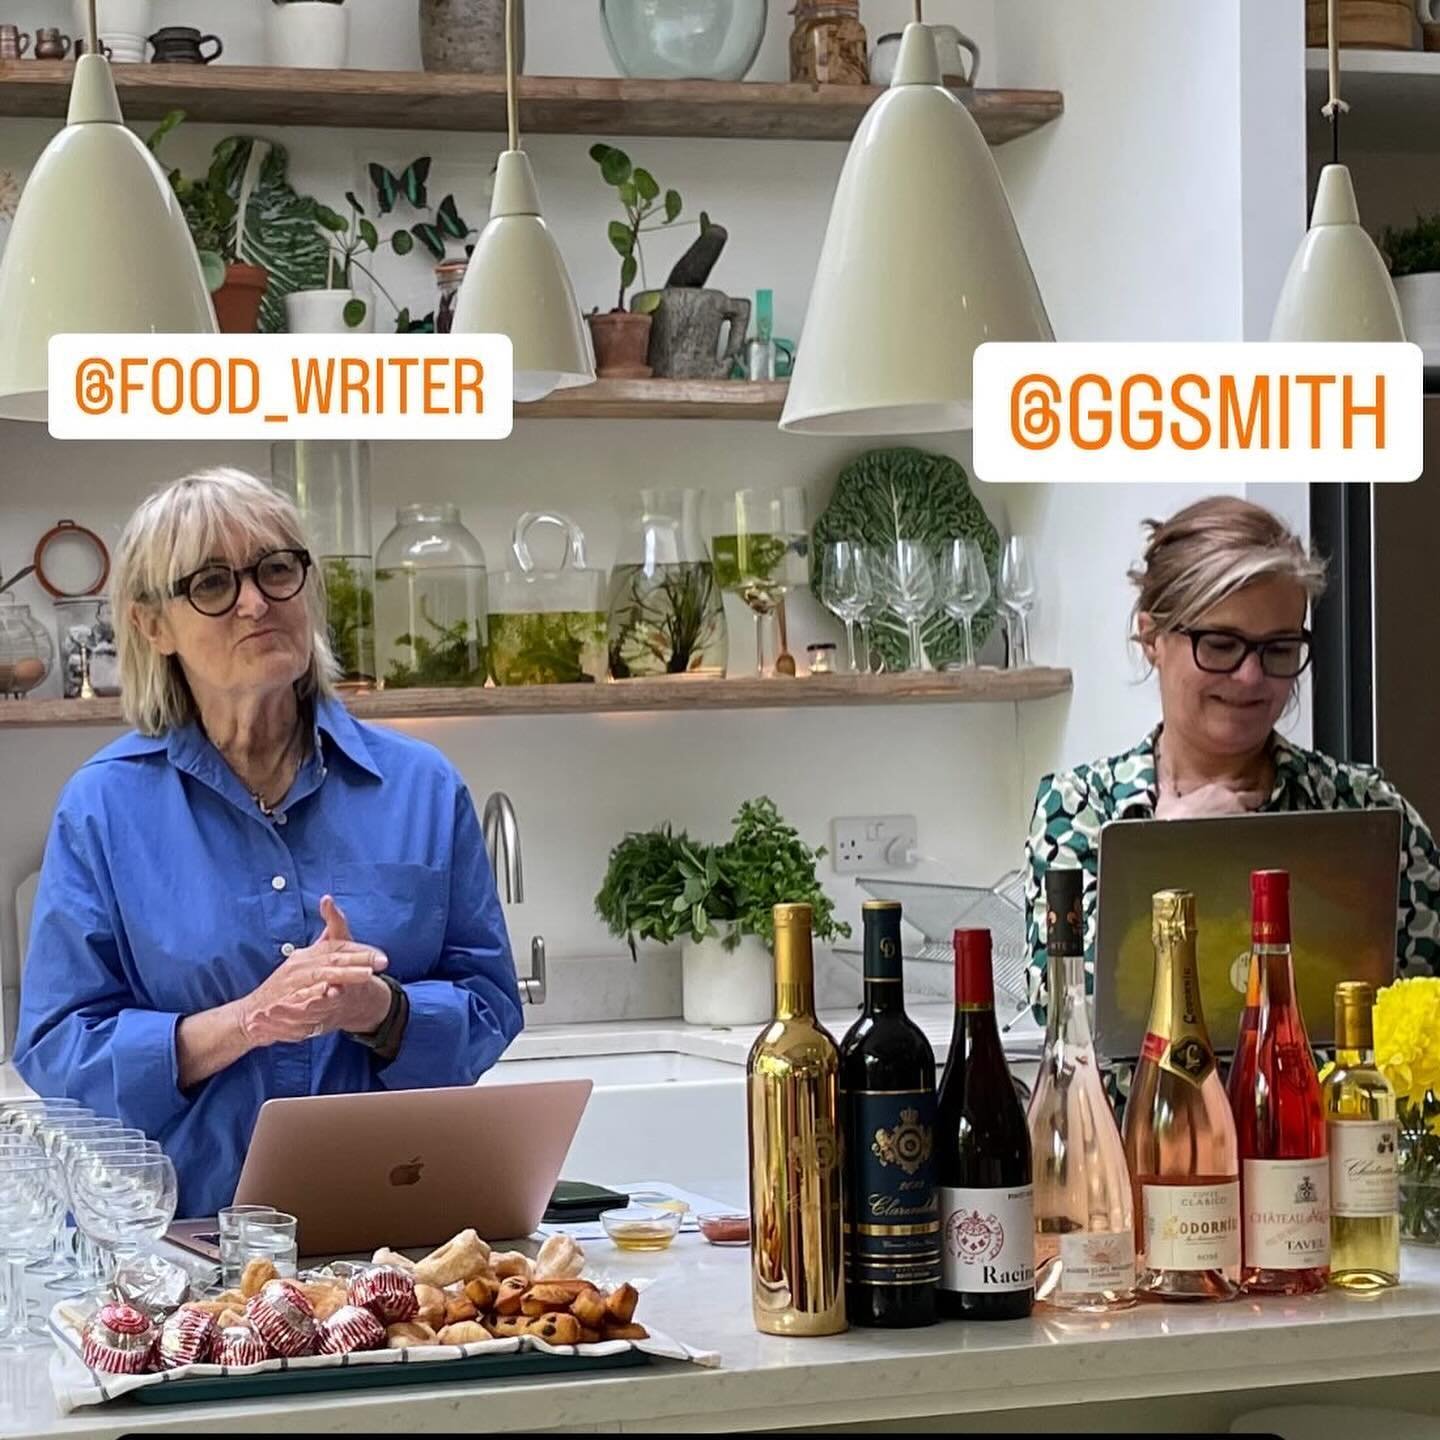 Thank you @food_writer and @ggsmith 🙏for today&rsquo;s food and wine pairing workshop. 
✅Made new food-loving friends 
✅Learnt lots and had fun
✅Will weave new learnings into my life (especially the Cava and croquetas tip and the Riesling and green 